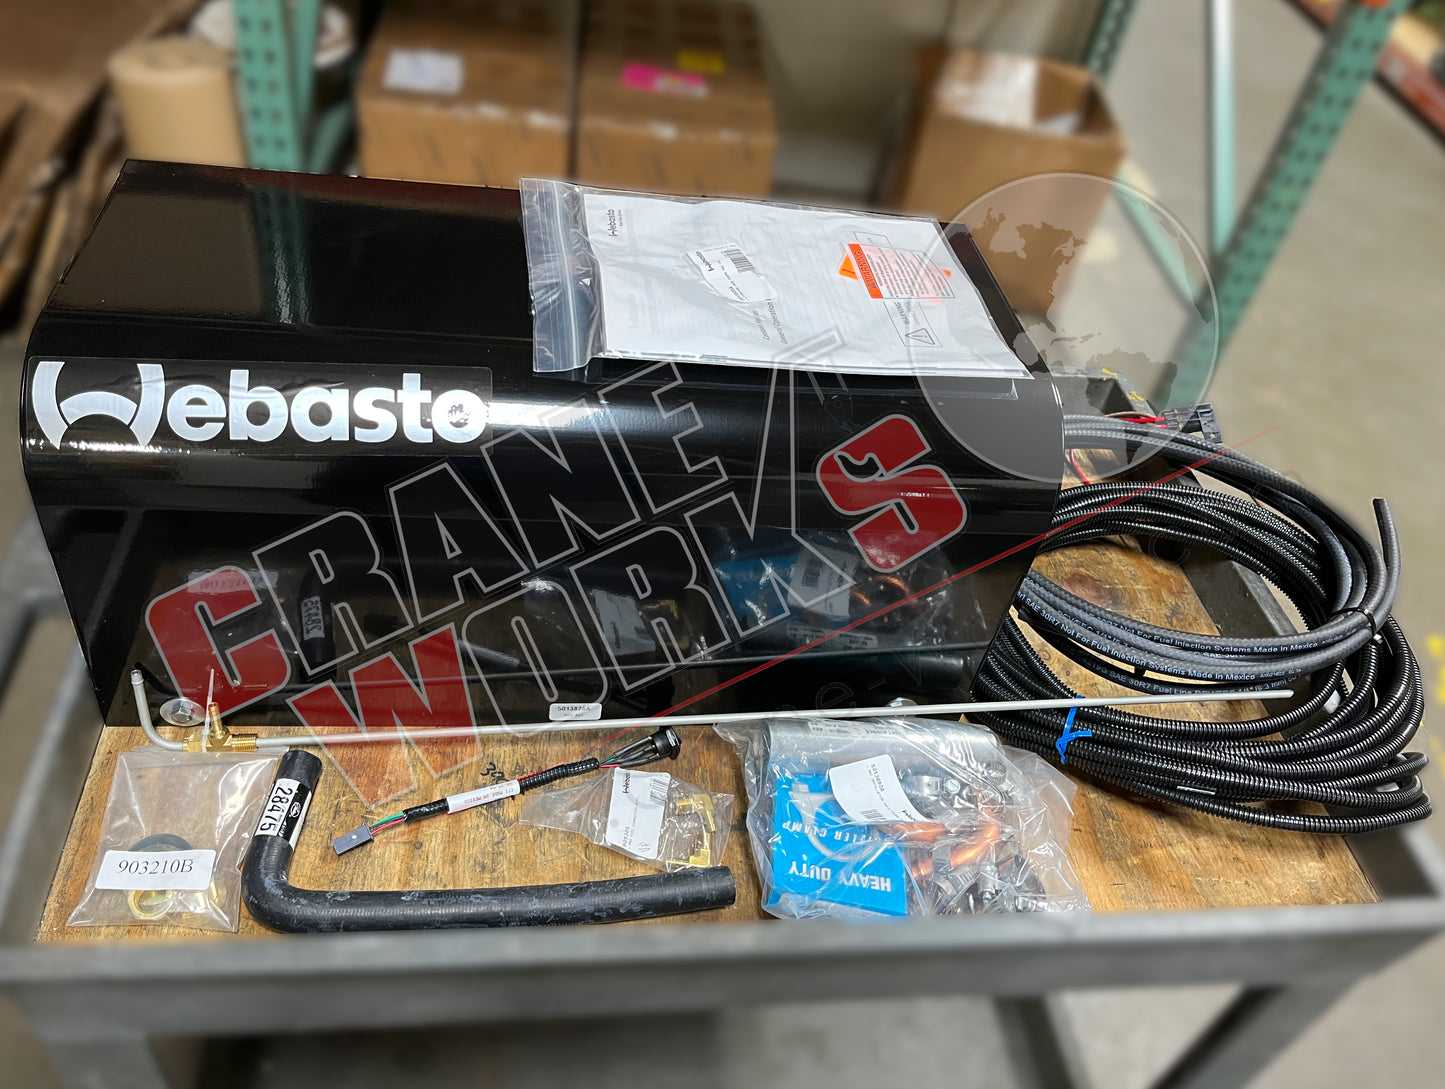 Picture of 5013833A, 24v Webasto heater unit and all included accessories.